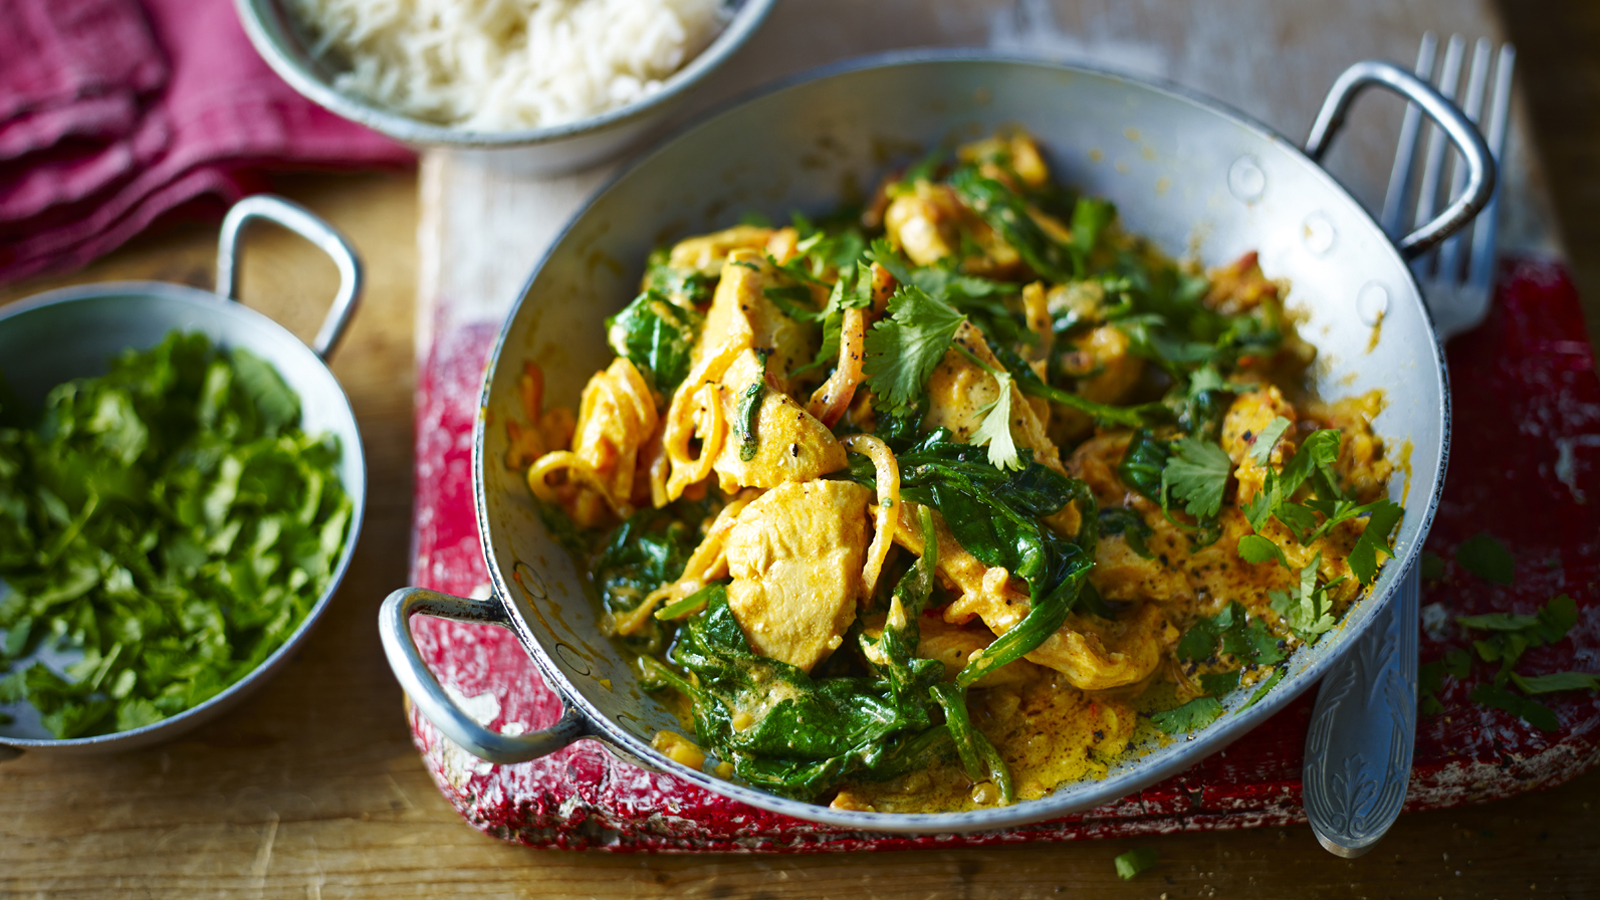 https://food-images.files.bbci.co.uk/food/recipes/chickenandspinachbal_86977_16x9.jpg